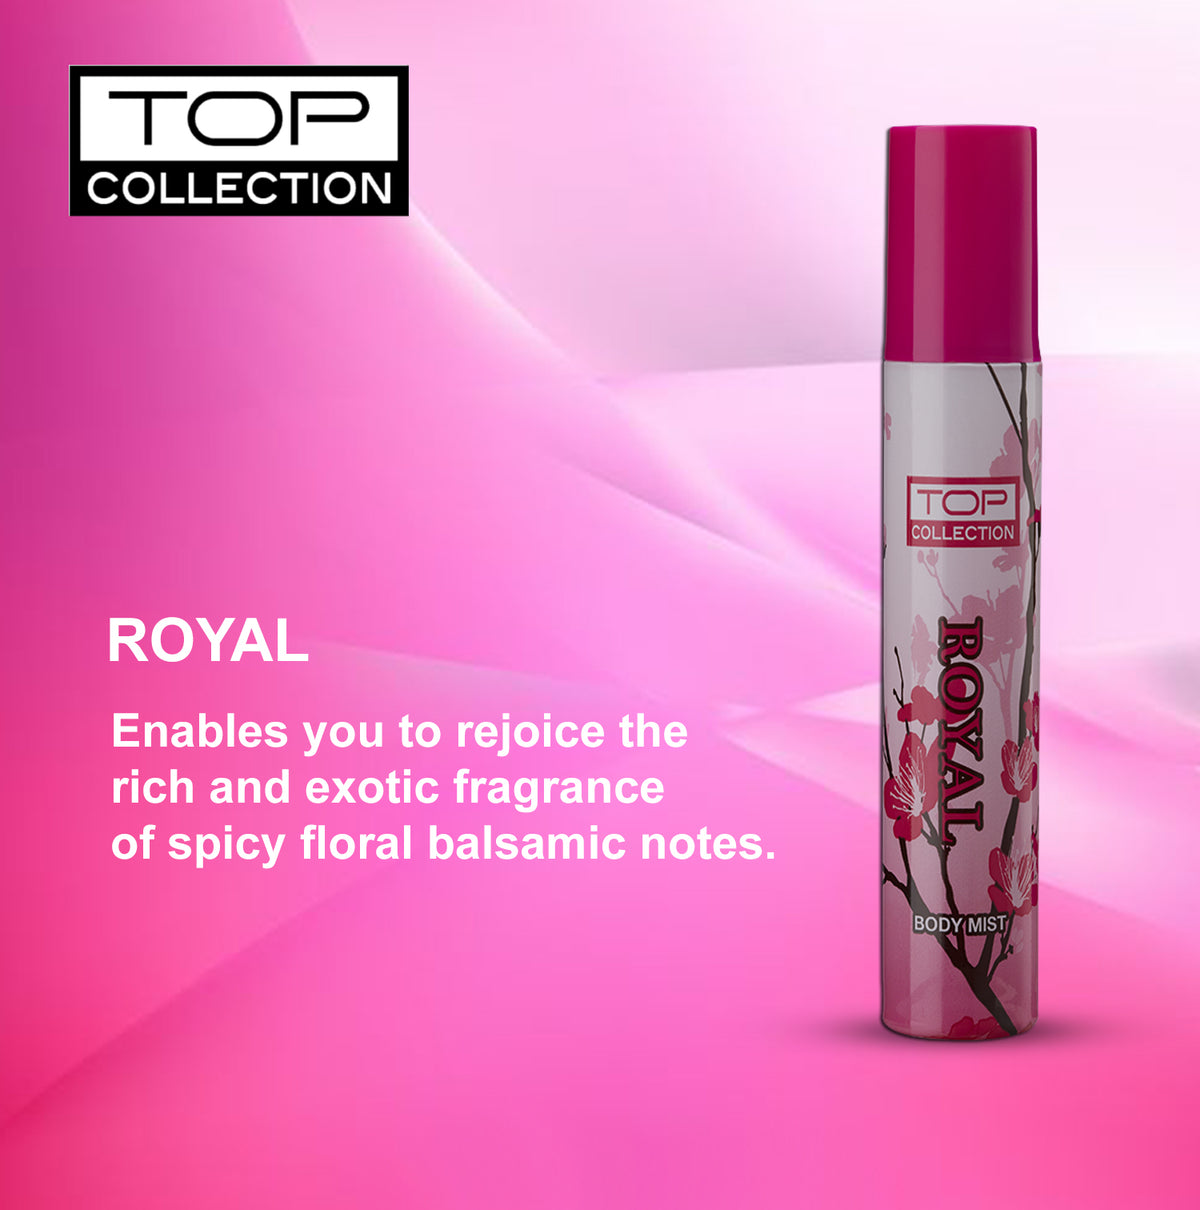 Top Collection Body Mist - Royal, 75ml